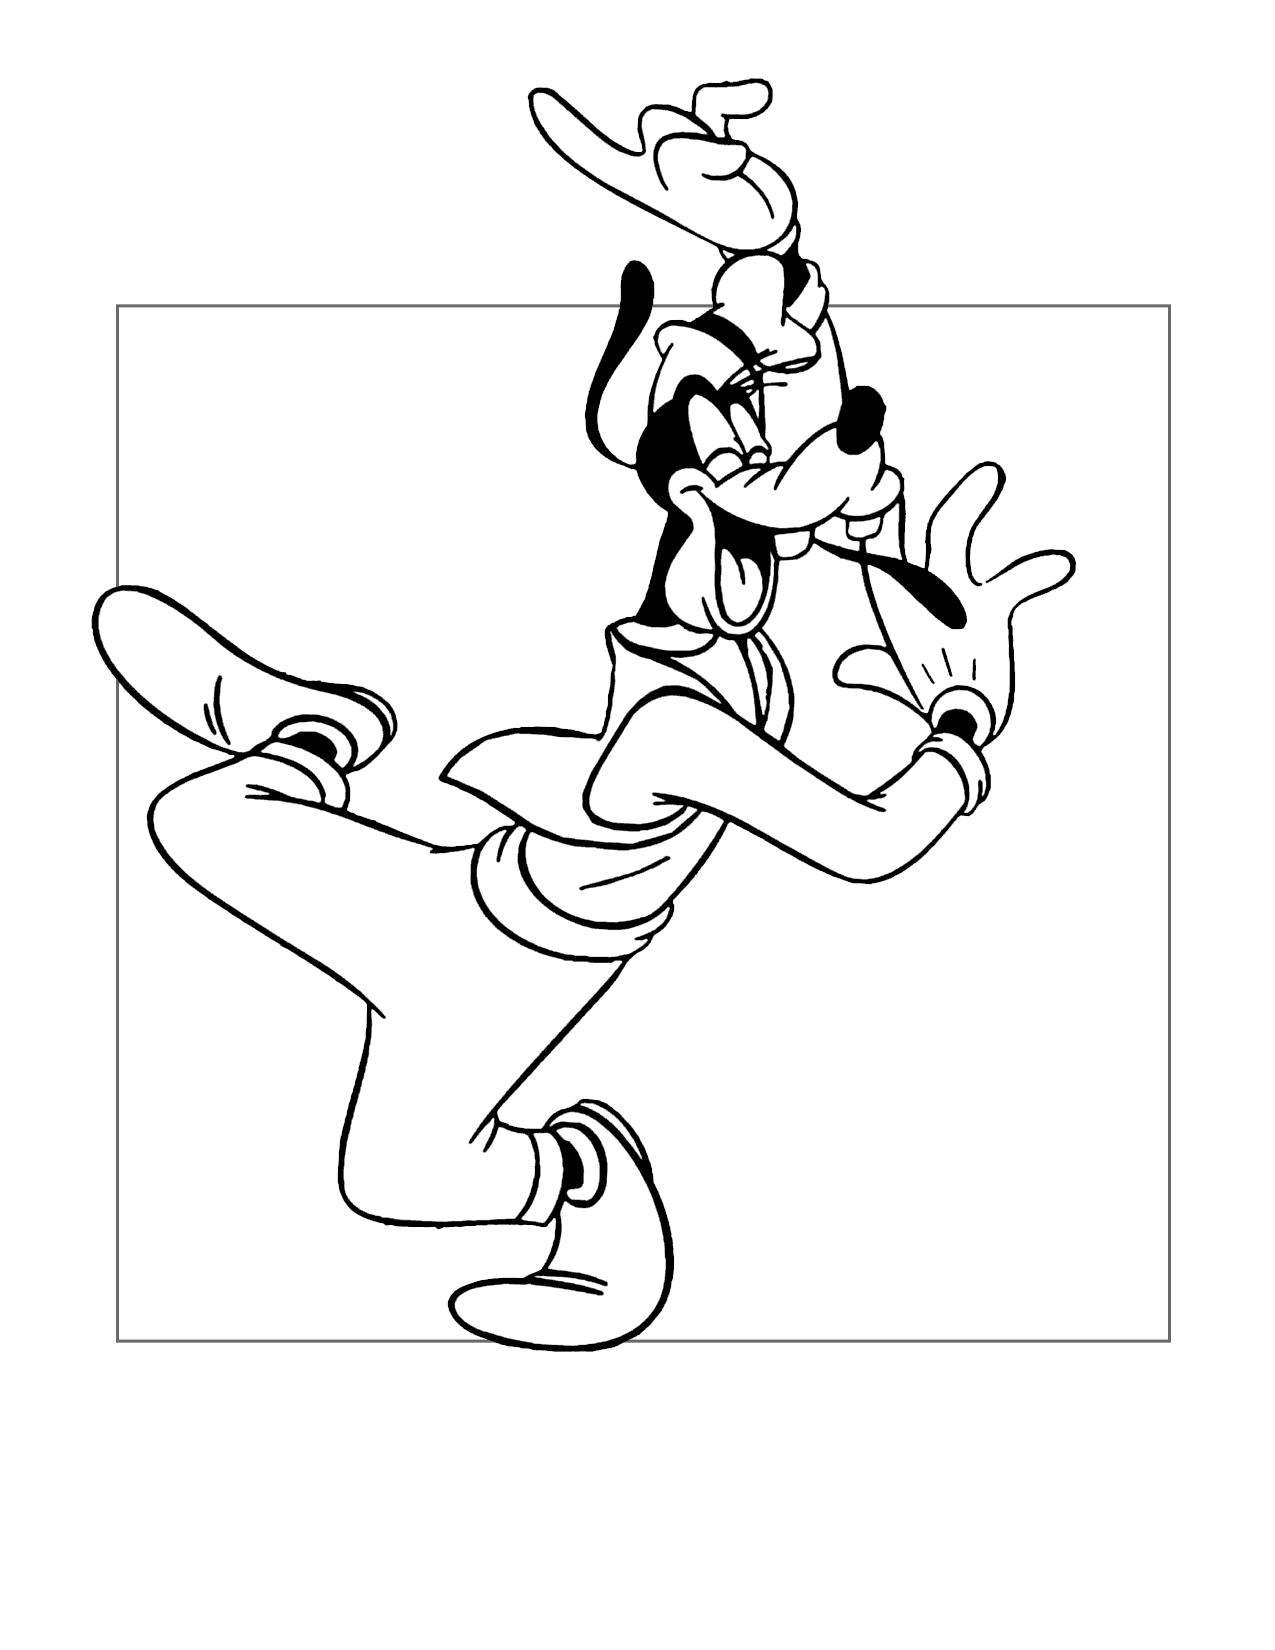 Hilarious Goofy Dancing Coloring Page